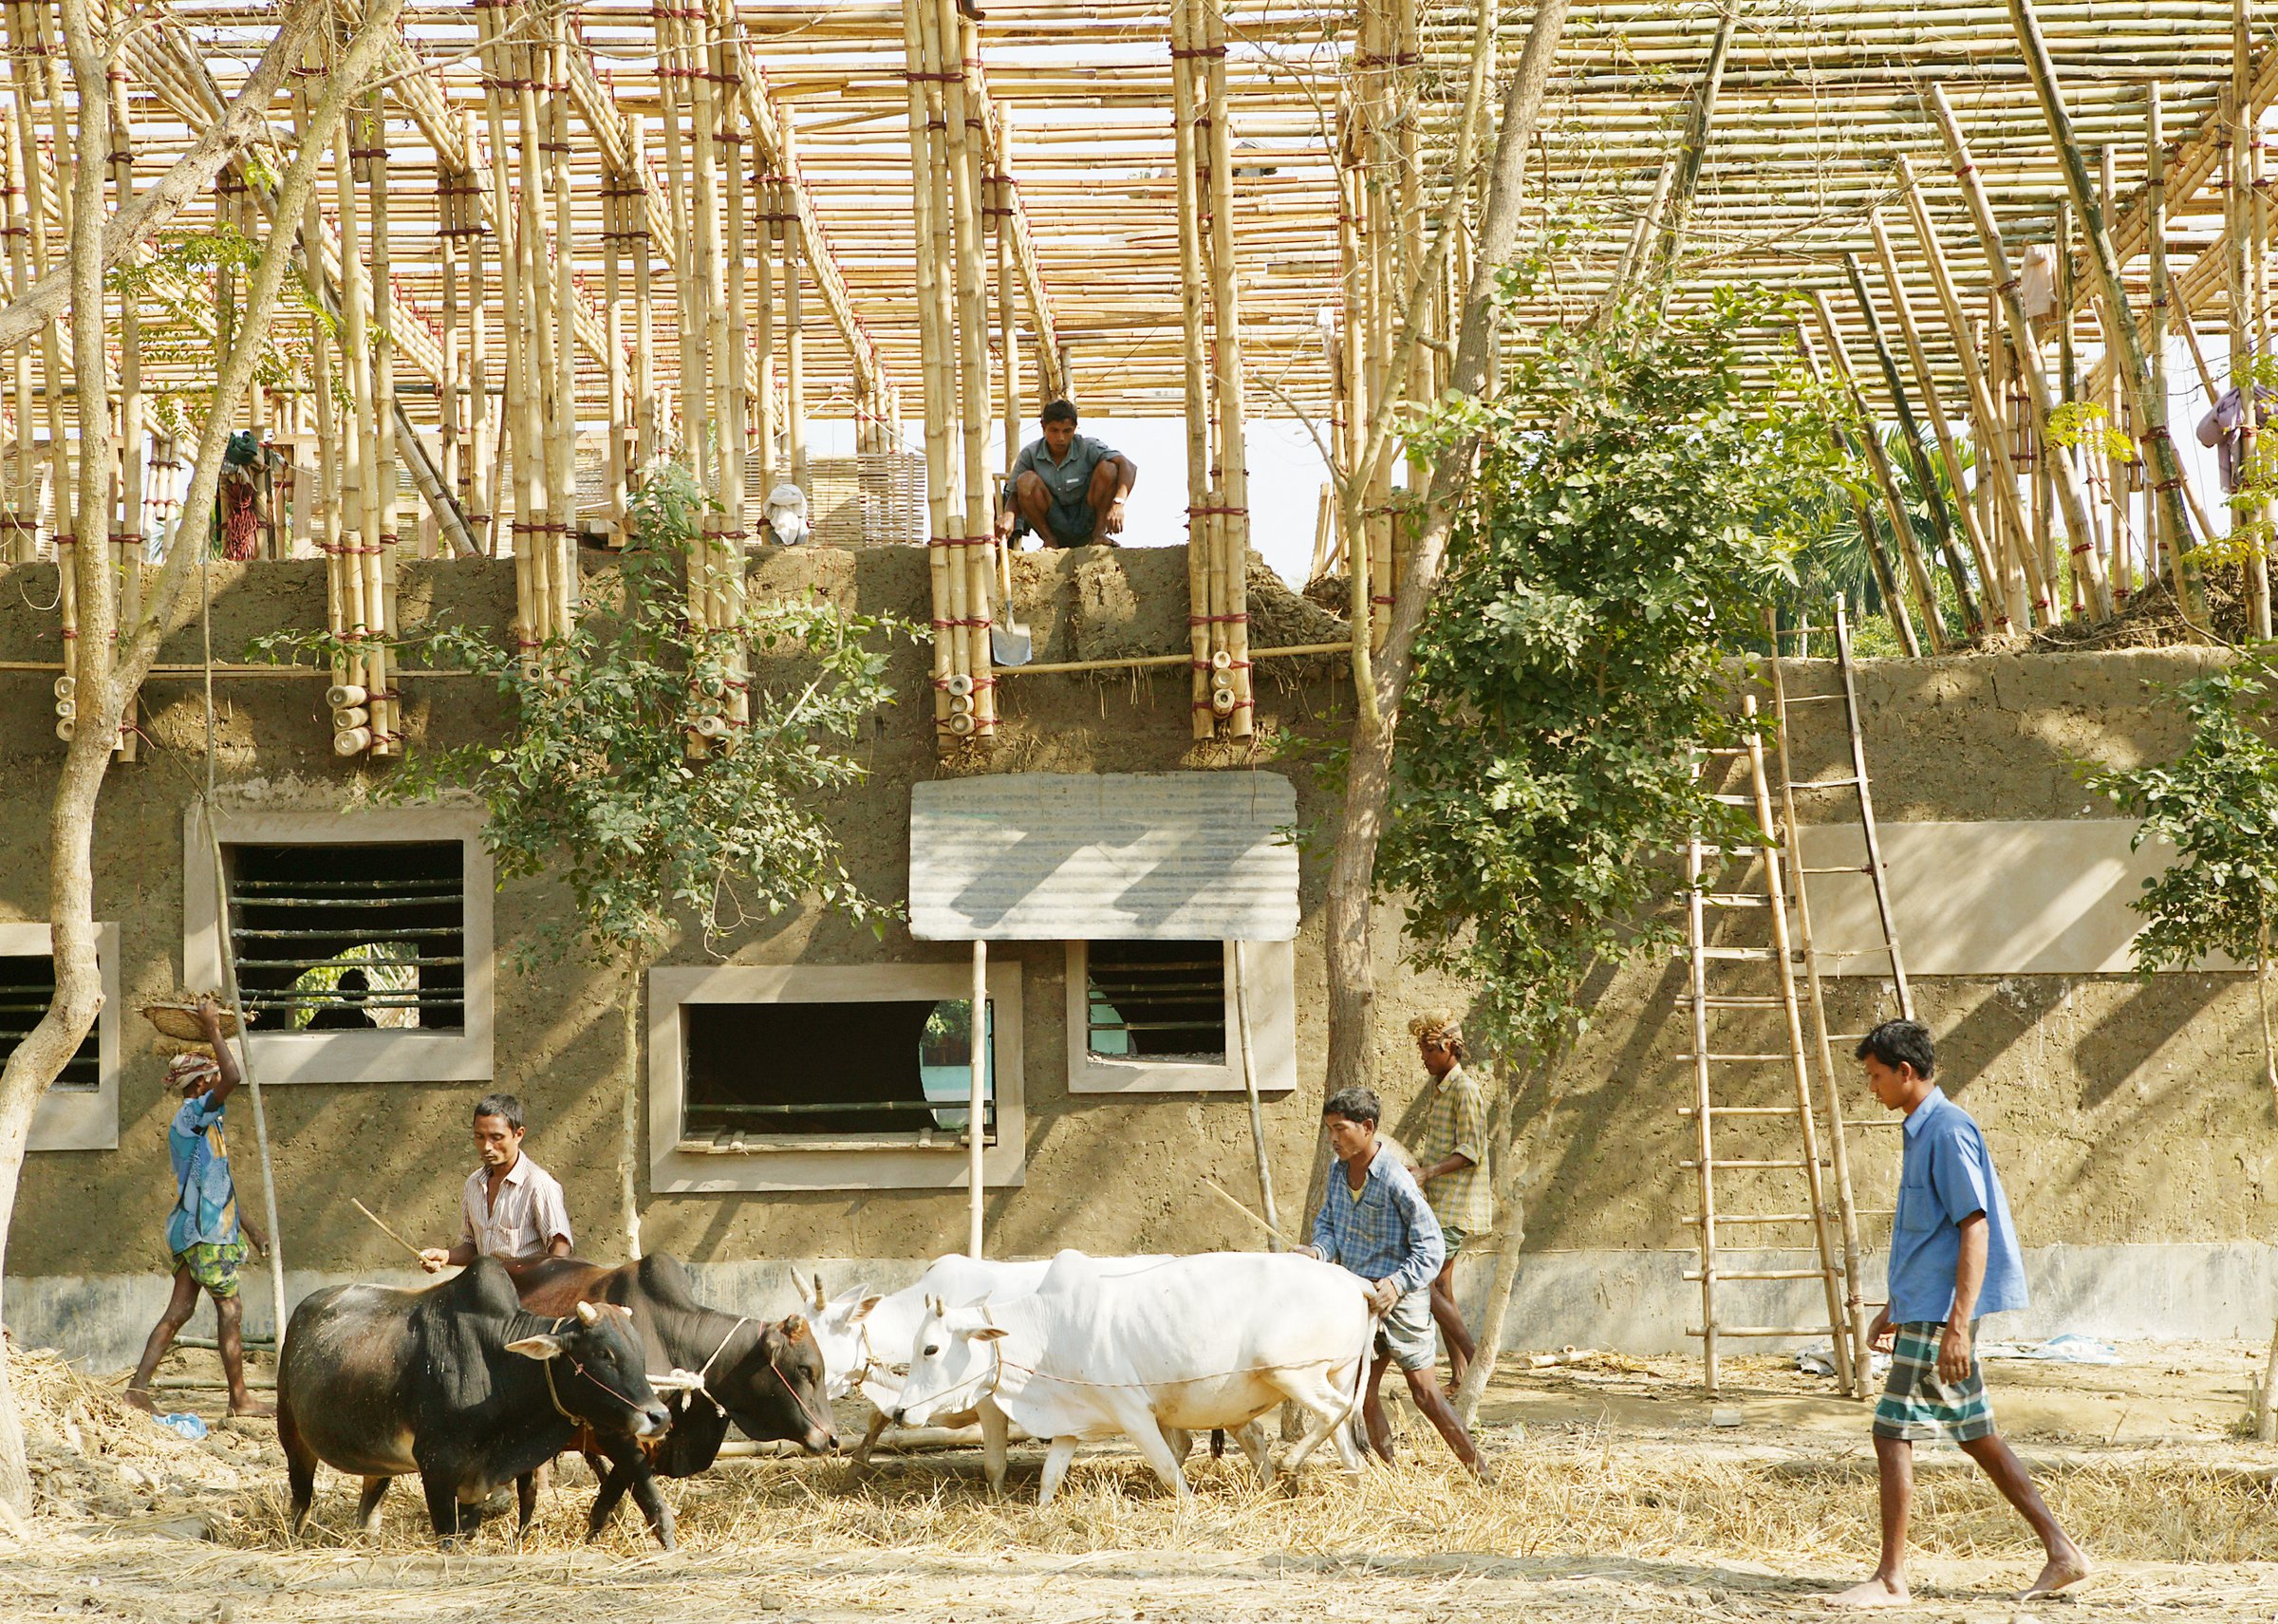 other materials used are a mixture of straw and soil made with the help of cows and buffalo